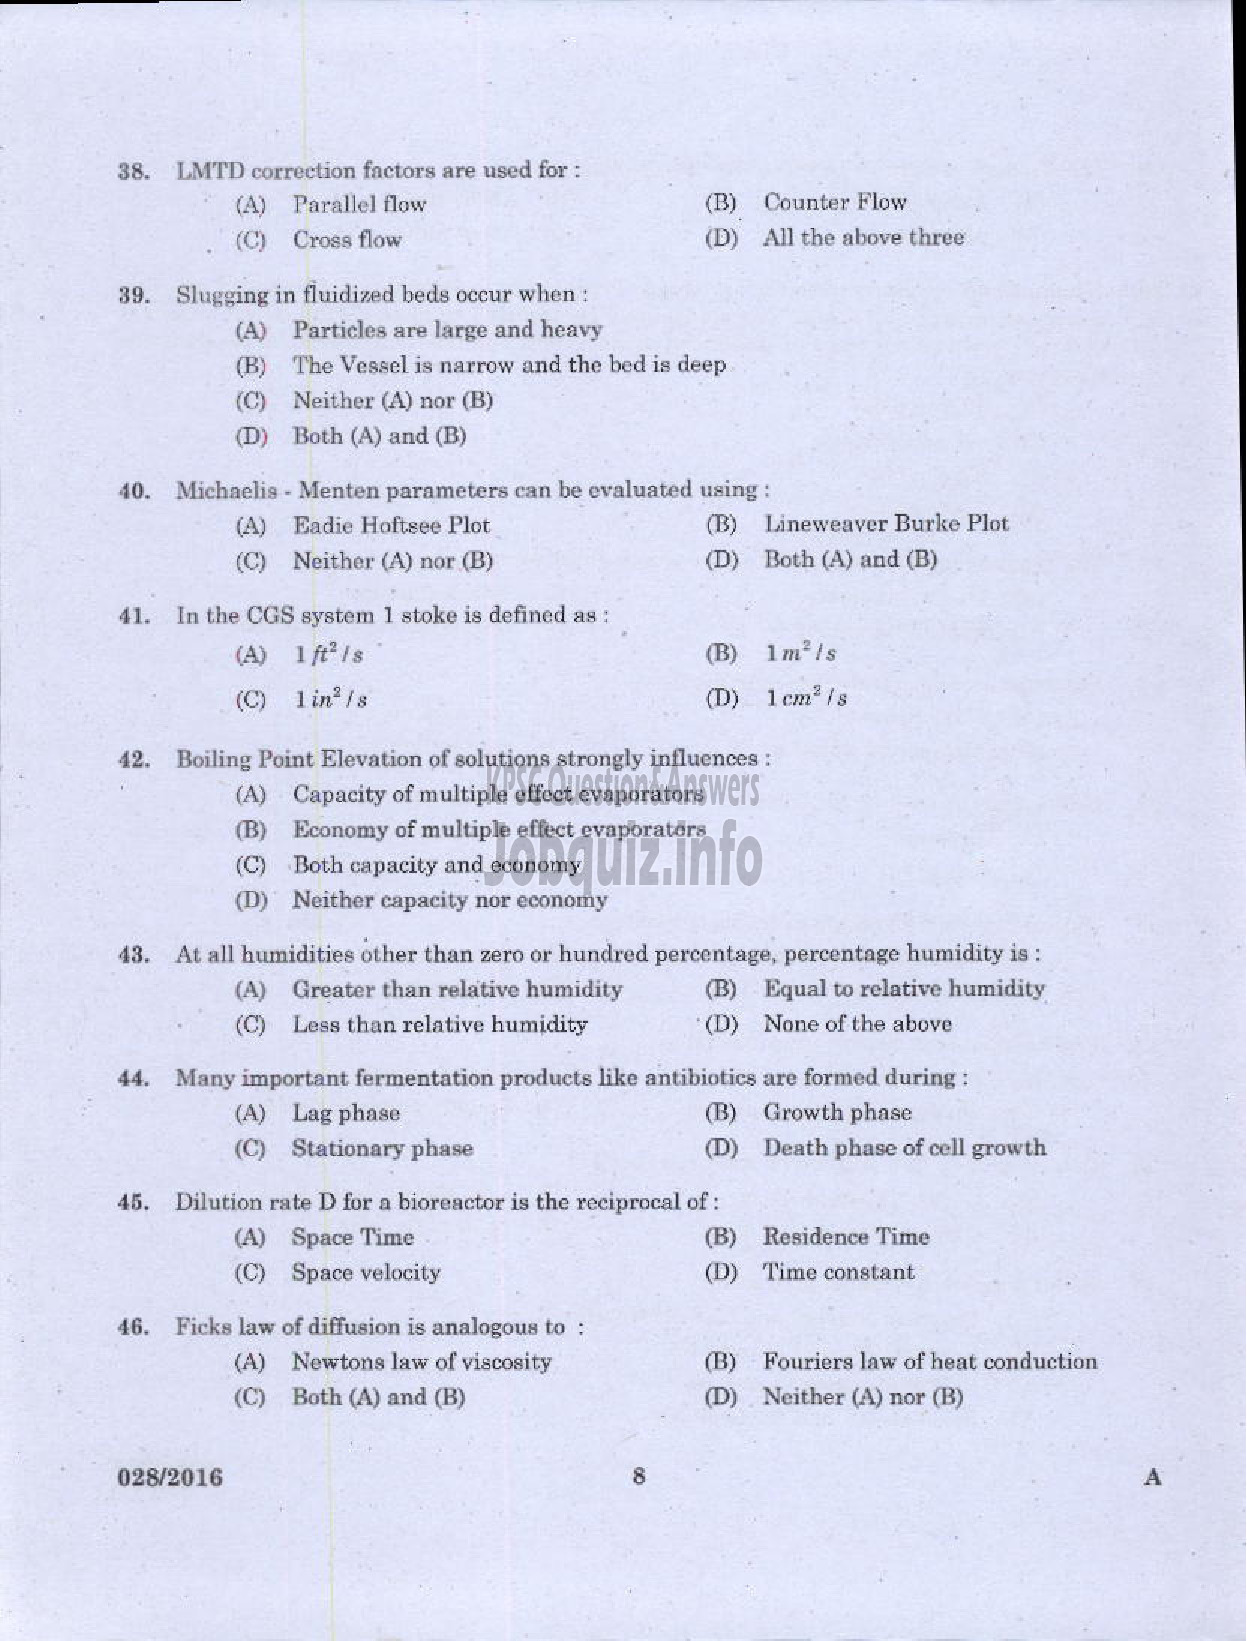 Kerala PSC Question Paper - ASSISTANT ENGINEER DIRECT/BY TRANSFER KERALA WATER AUTHORITY-6